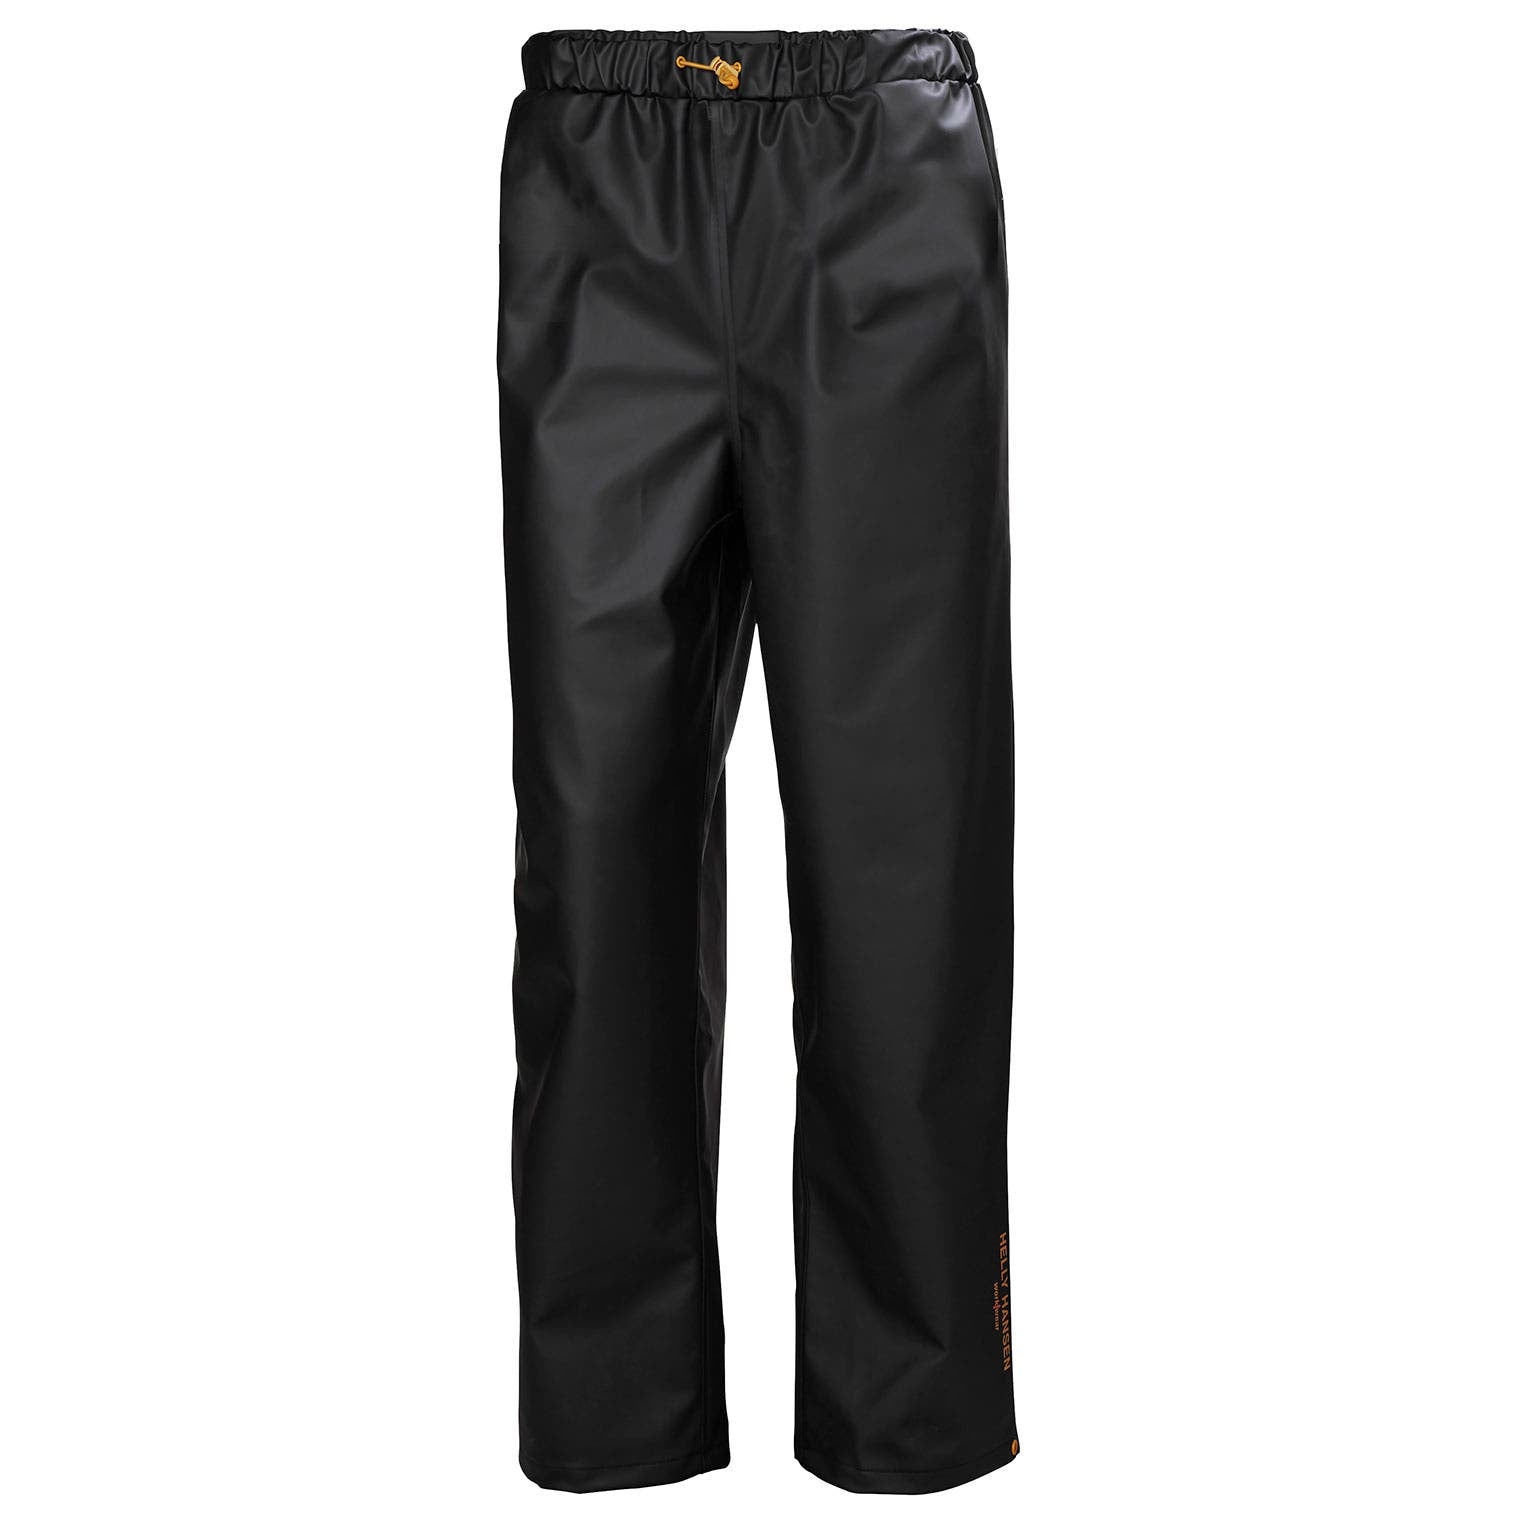 Helly Hansen Men's Gale Rain Pant in Black from the front